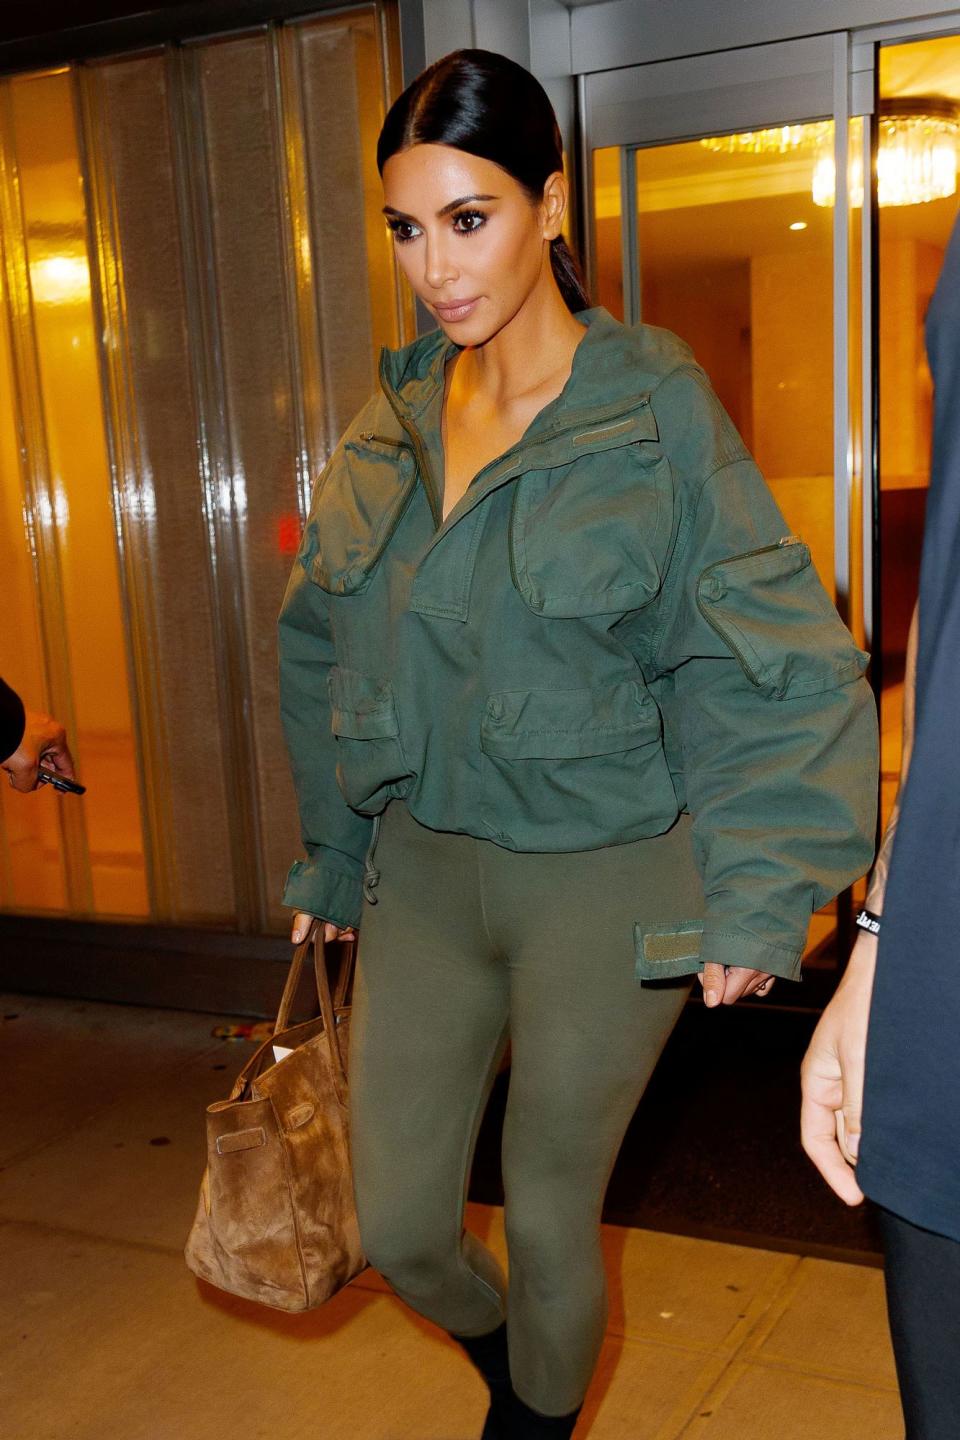 WHO: Kim Kardashian West<br> WHERE: On the street, New York City<br> WHEN: June 7, 2018